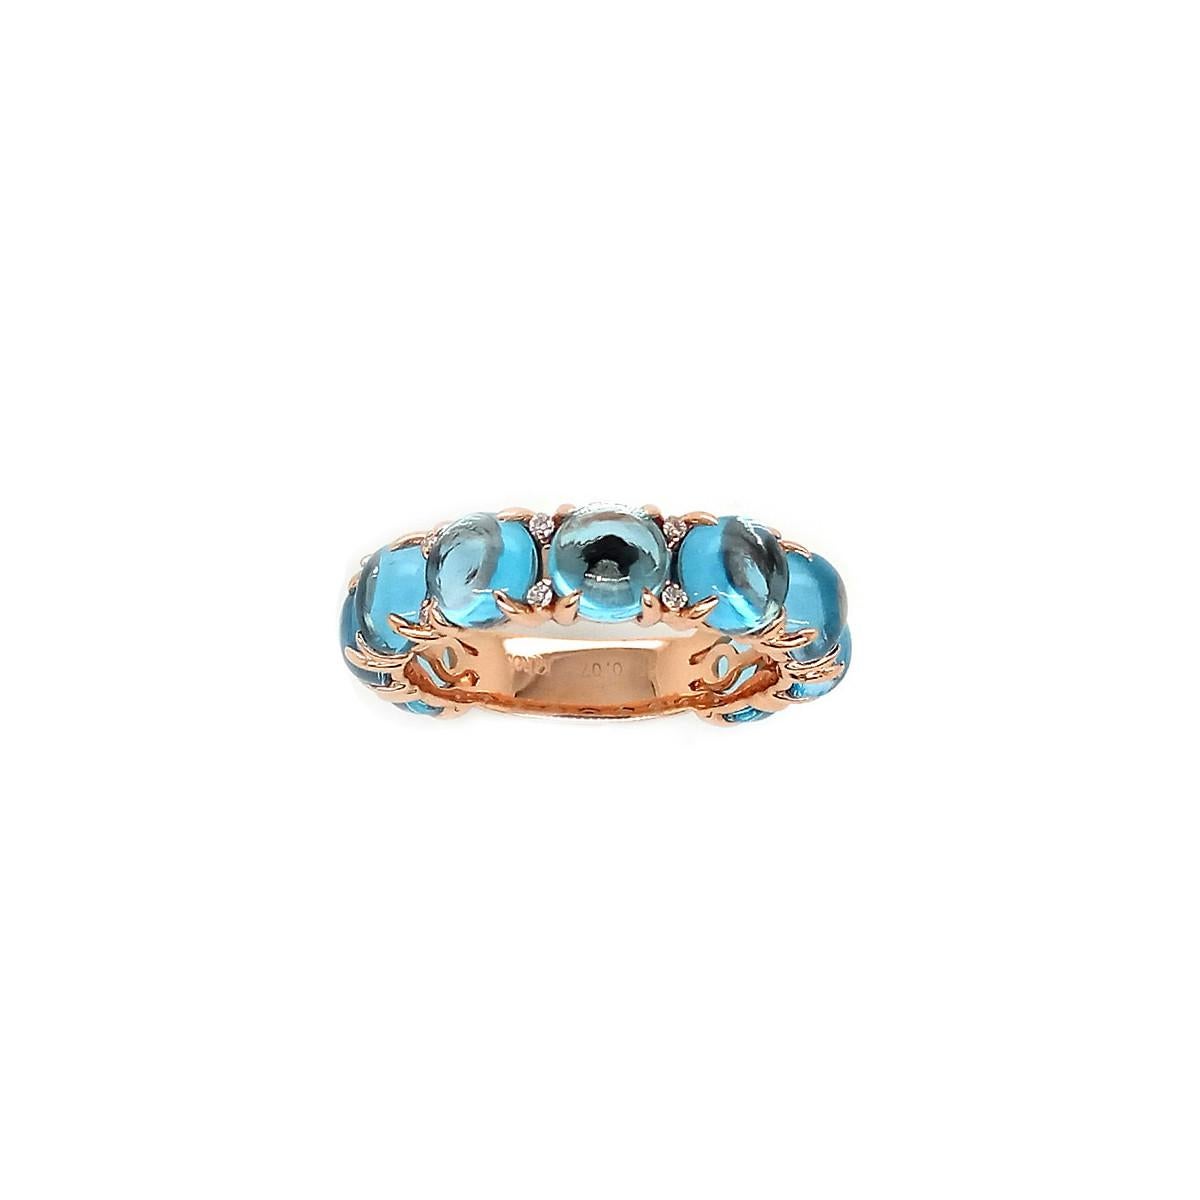 Beautiful Ring in 18K Rose Gold Diamonds and Moonstones

Rose Gold 18K
16 Diamonds 0.06ct.
9 Moonstones 6.53ct.
Weight 3.93gr.

ALSO AVAILABLE
Rose Gold 18Kt
16 Diamonds 0.08ct.
9 Blue Topaz 6.45ct.
Weight 3.76gr.
€1700/ $1750approx.

ALSO